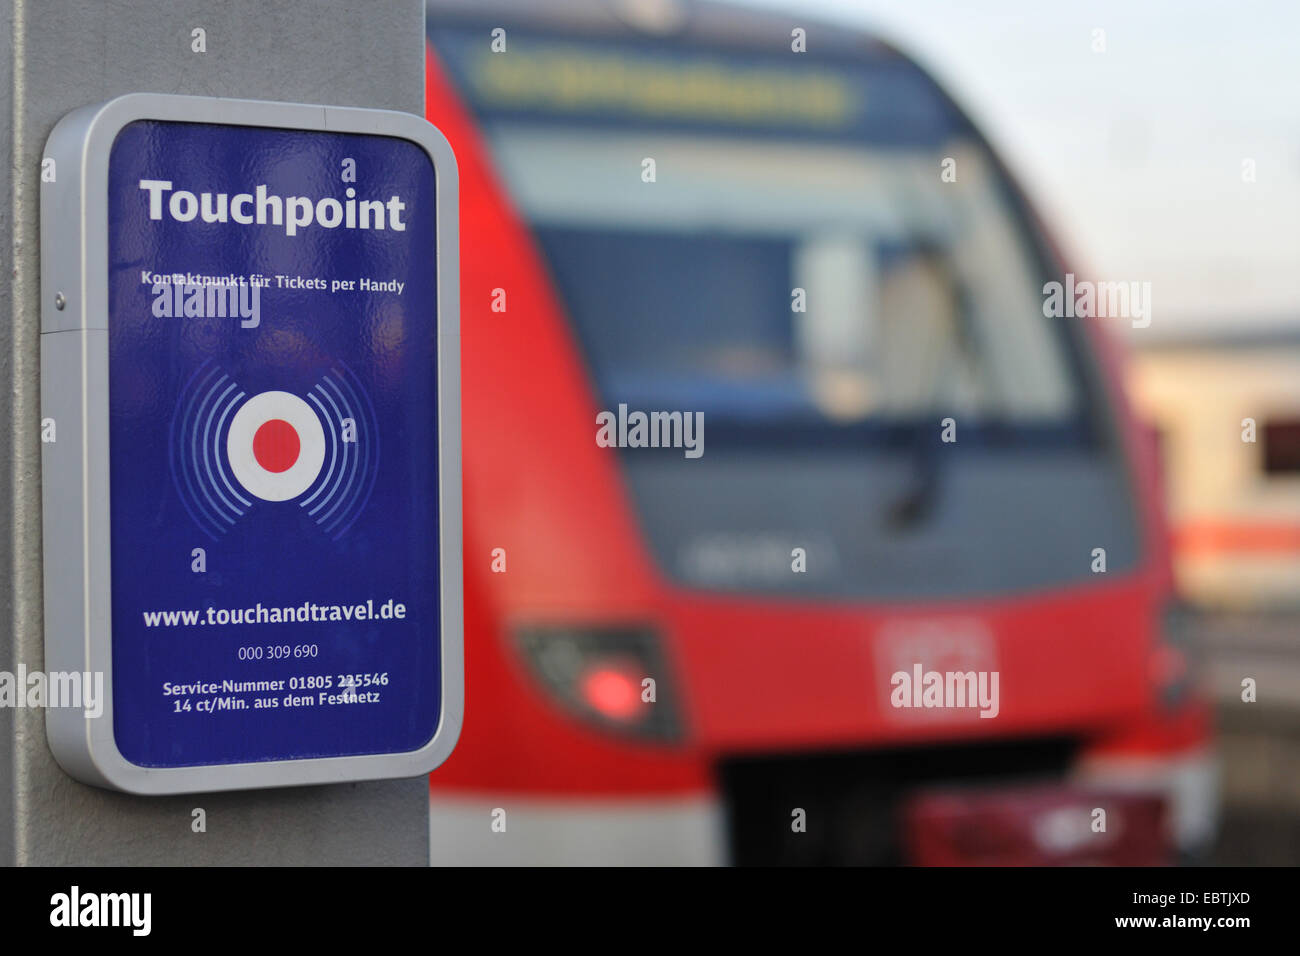 touchpoint at train plattform, a train in background, Germany Stock Photo